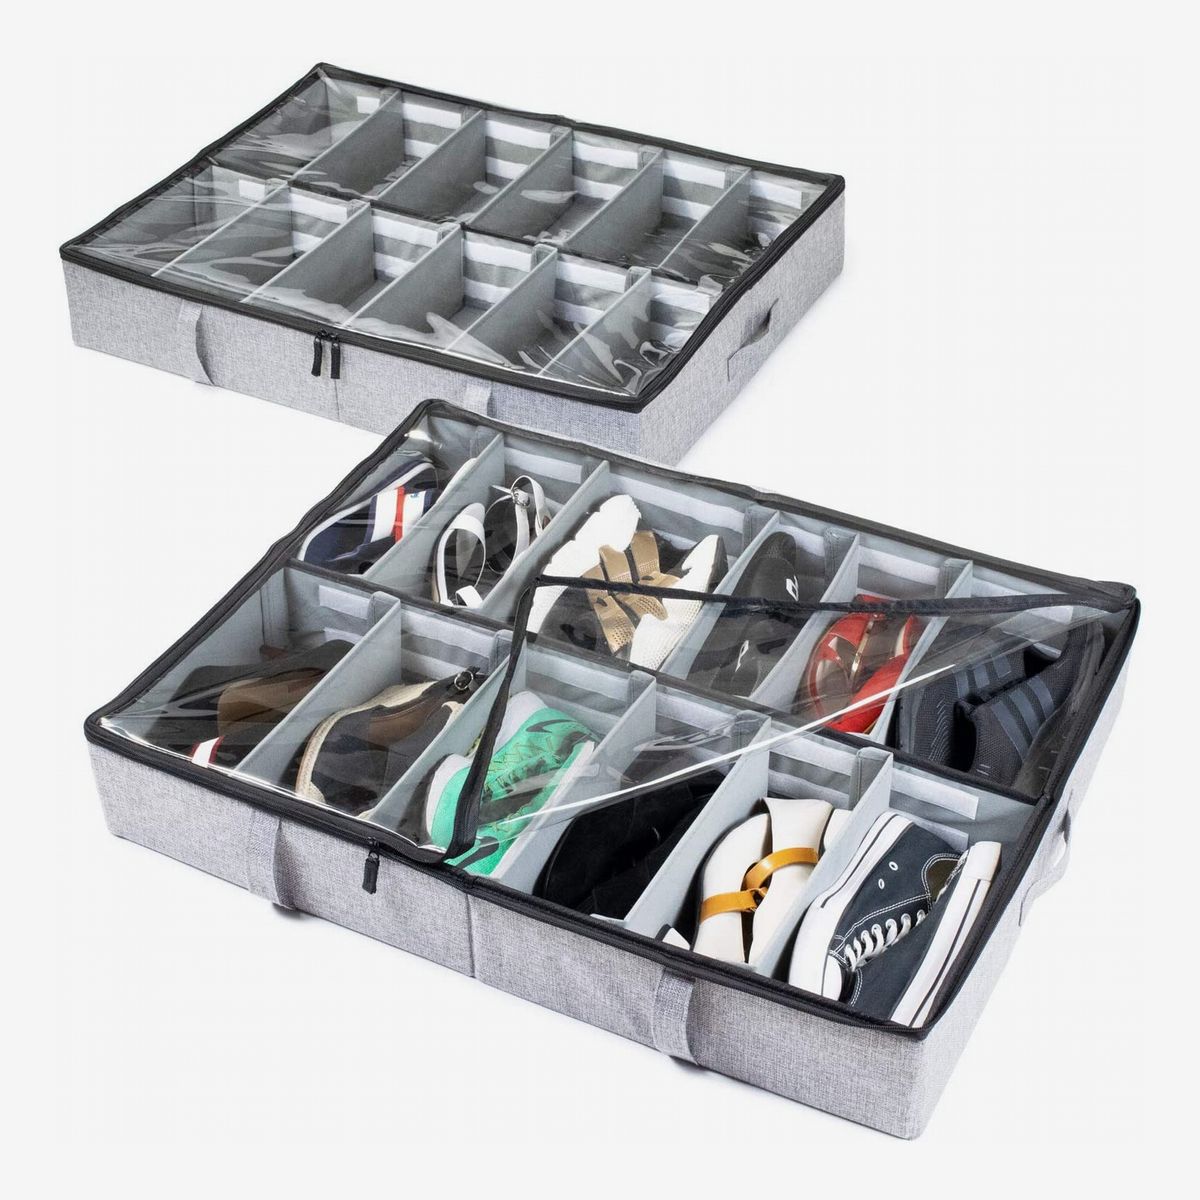 12 Pairs Shoes Storage Organizer Holder Container Shoe Under New Bed Closet X2Y0 